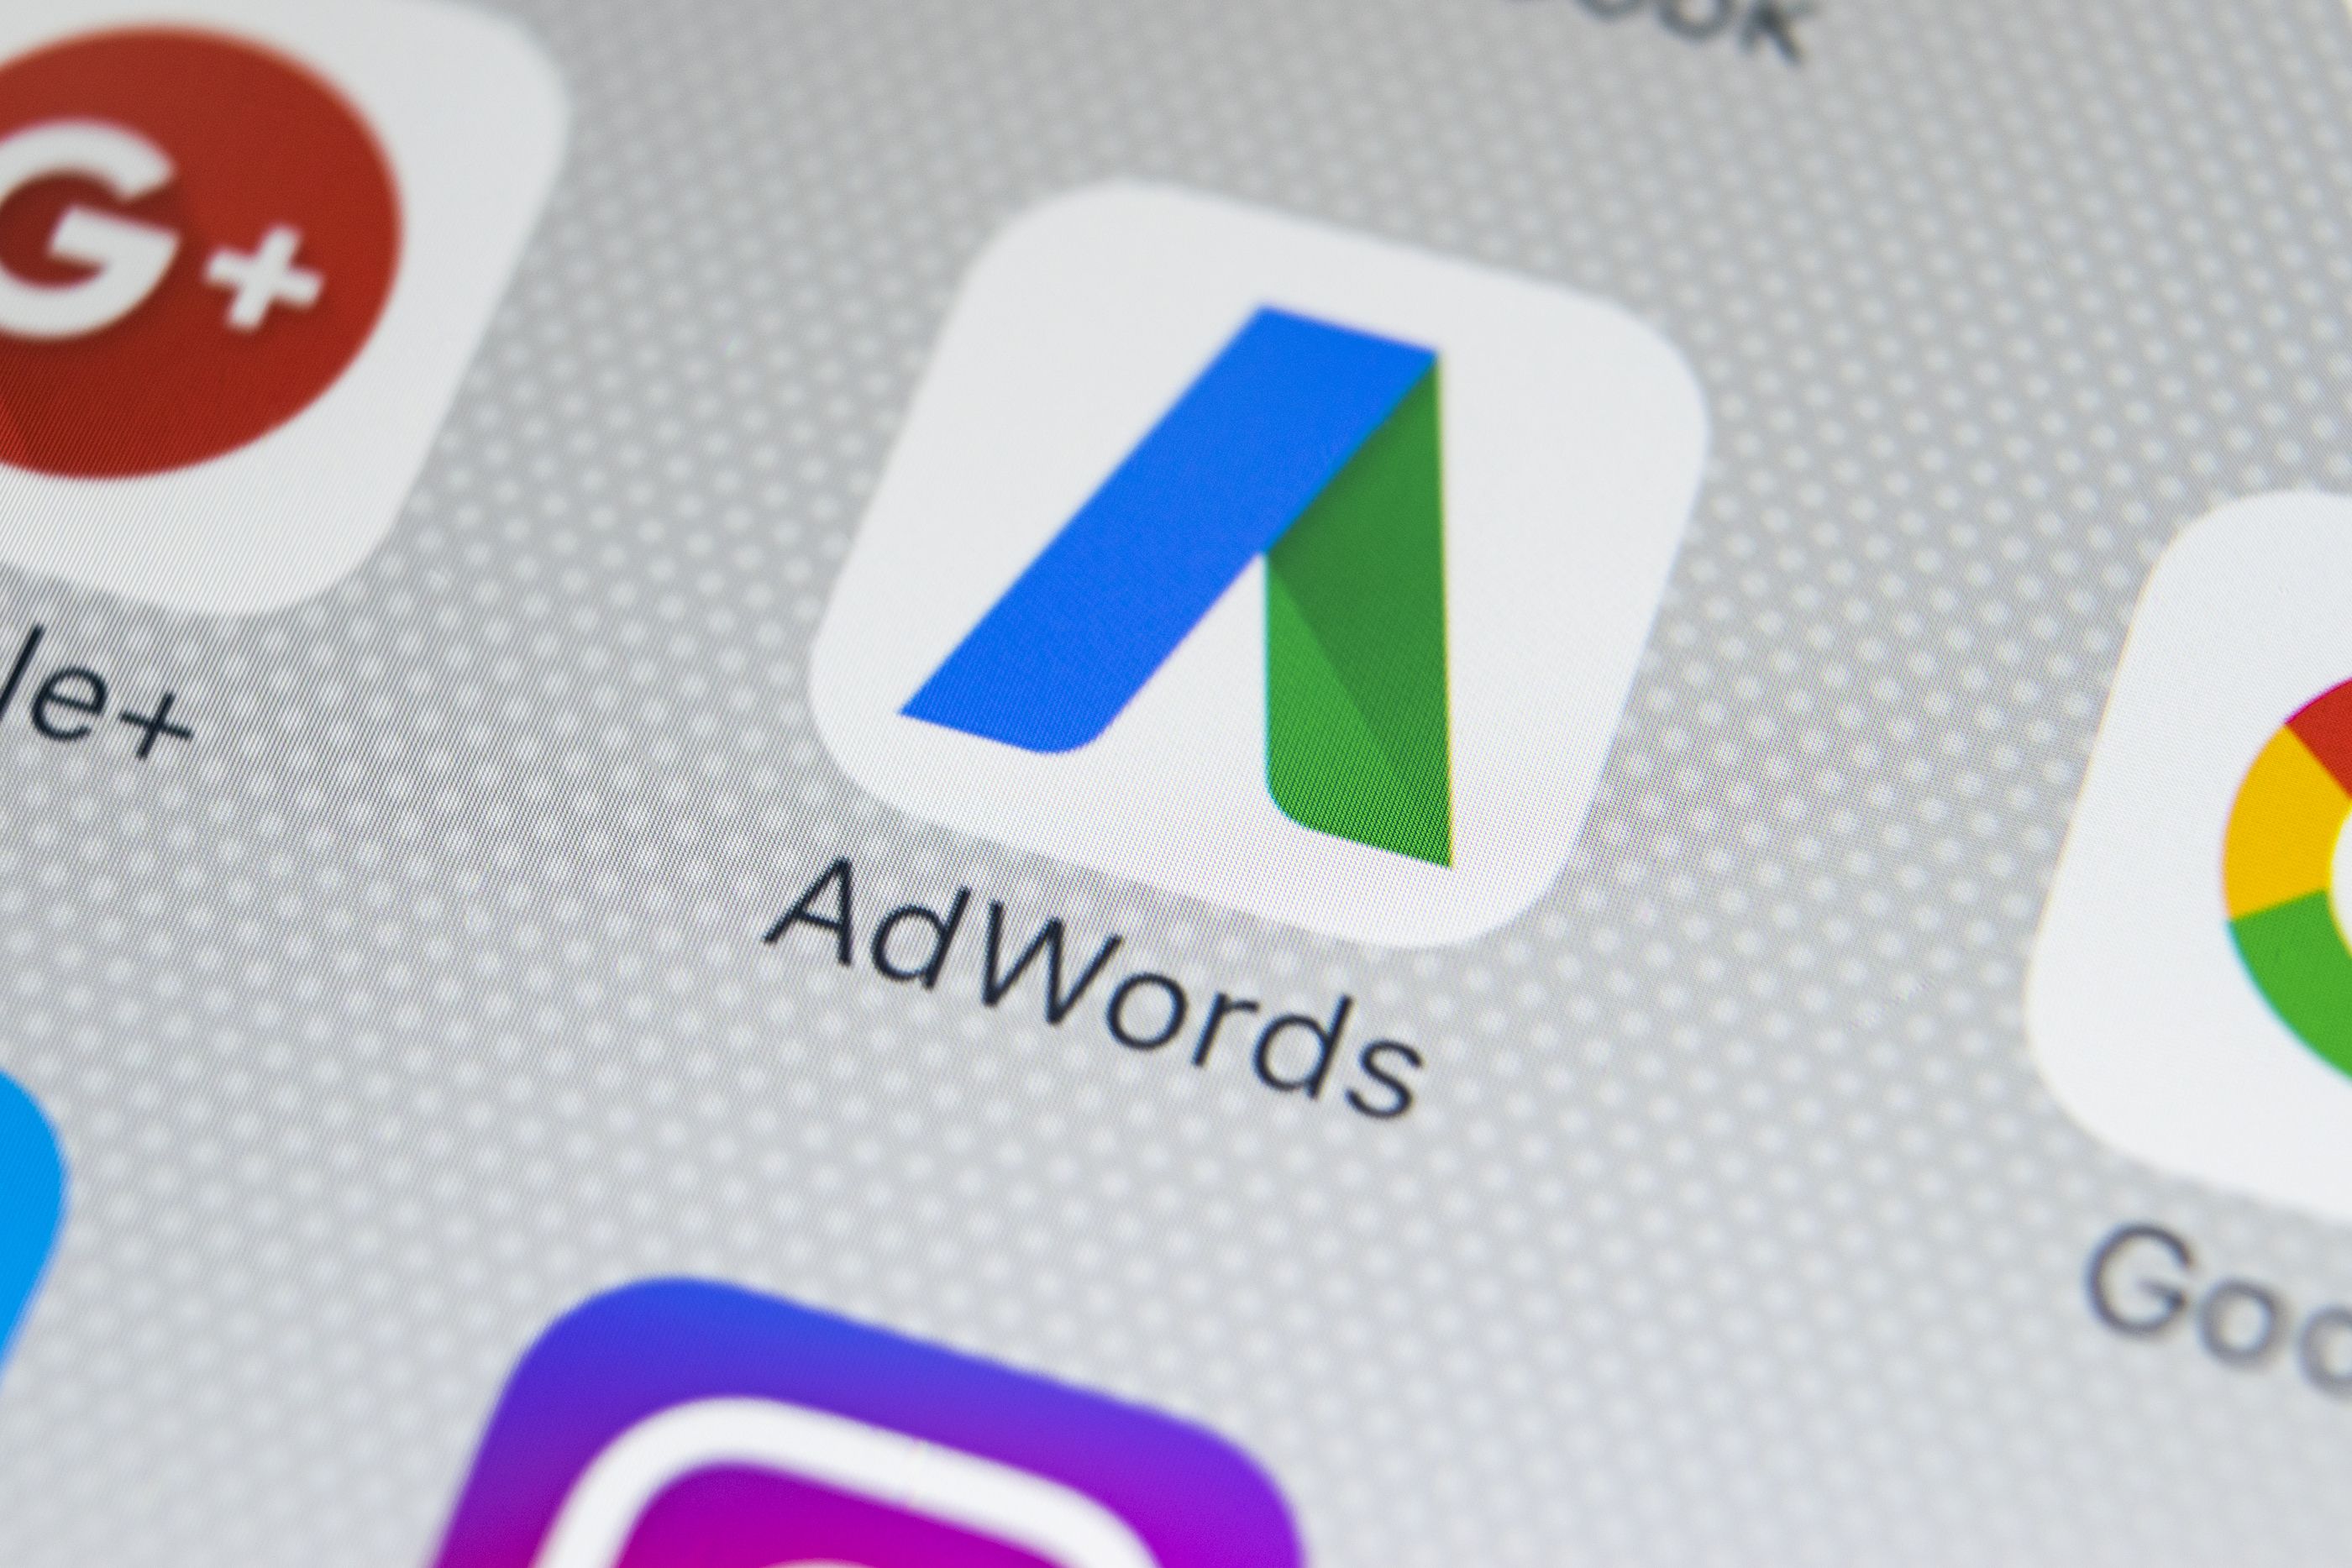 How Much Does Google Adwords Cost?